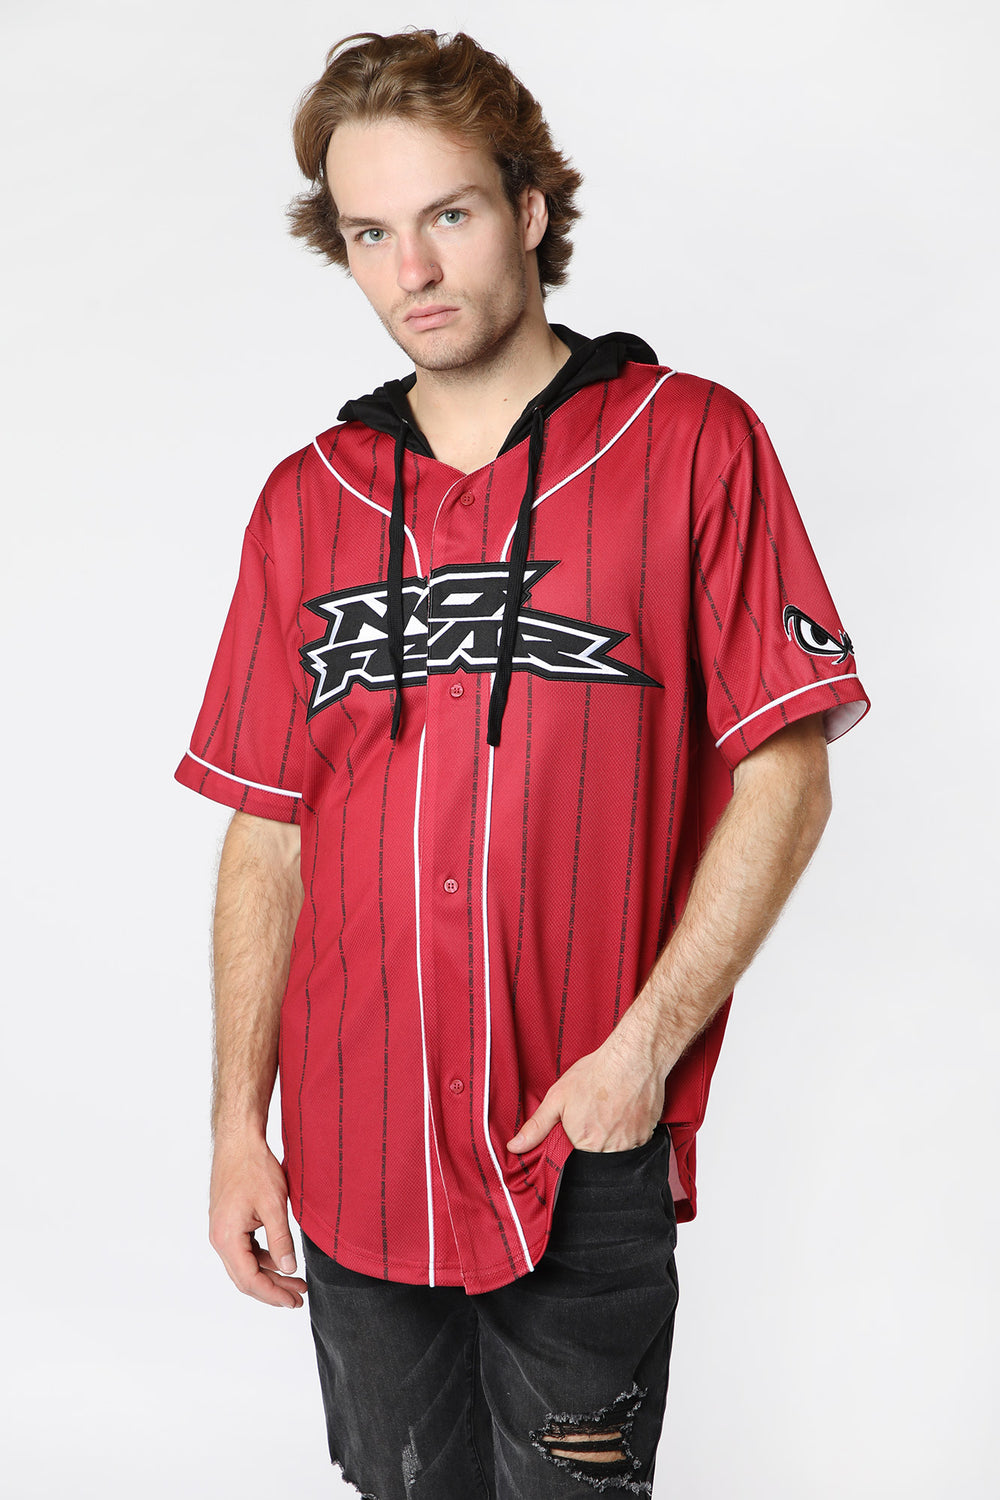 No Fear Mens Hooded Baseball Jersey Red